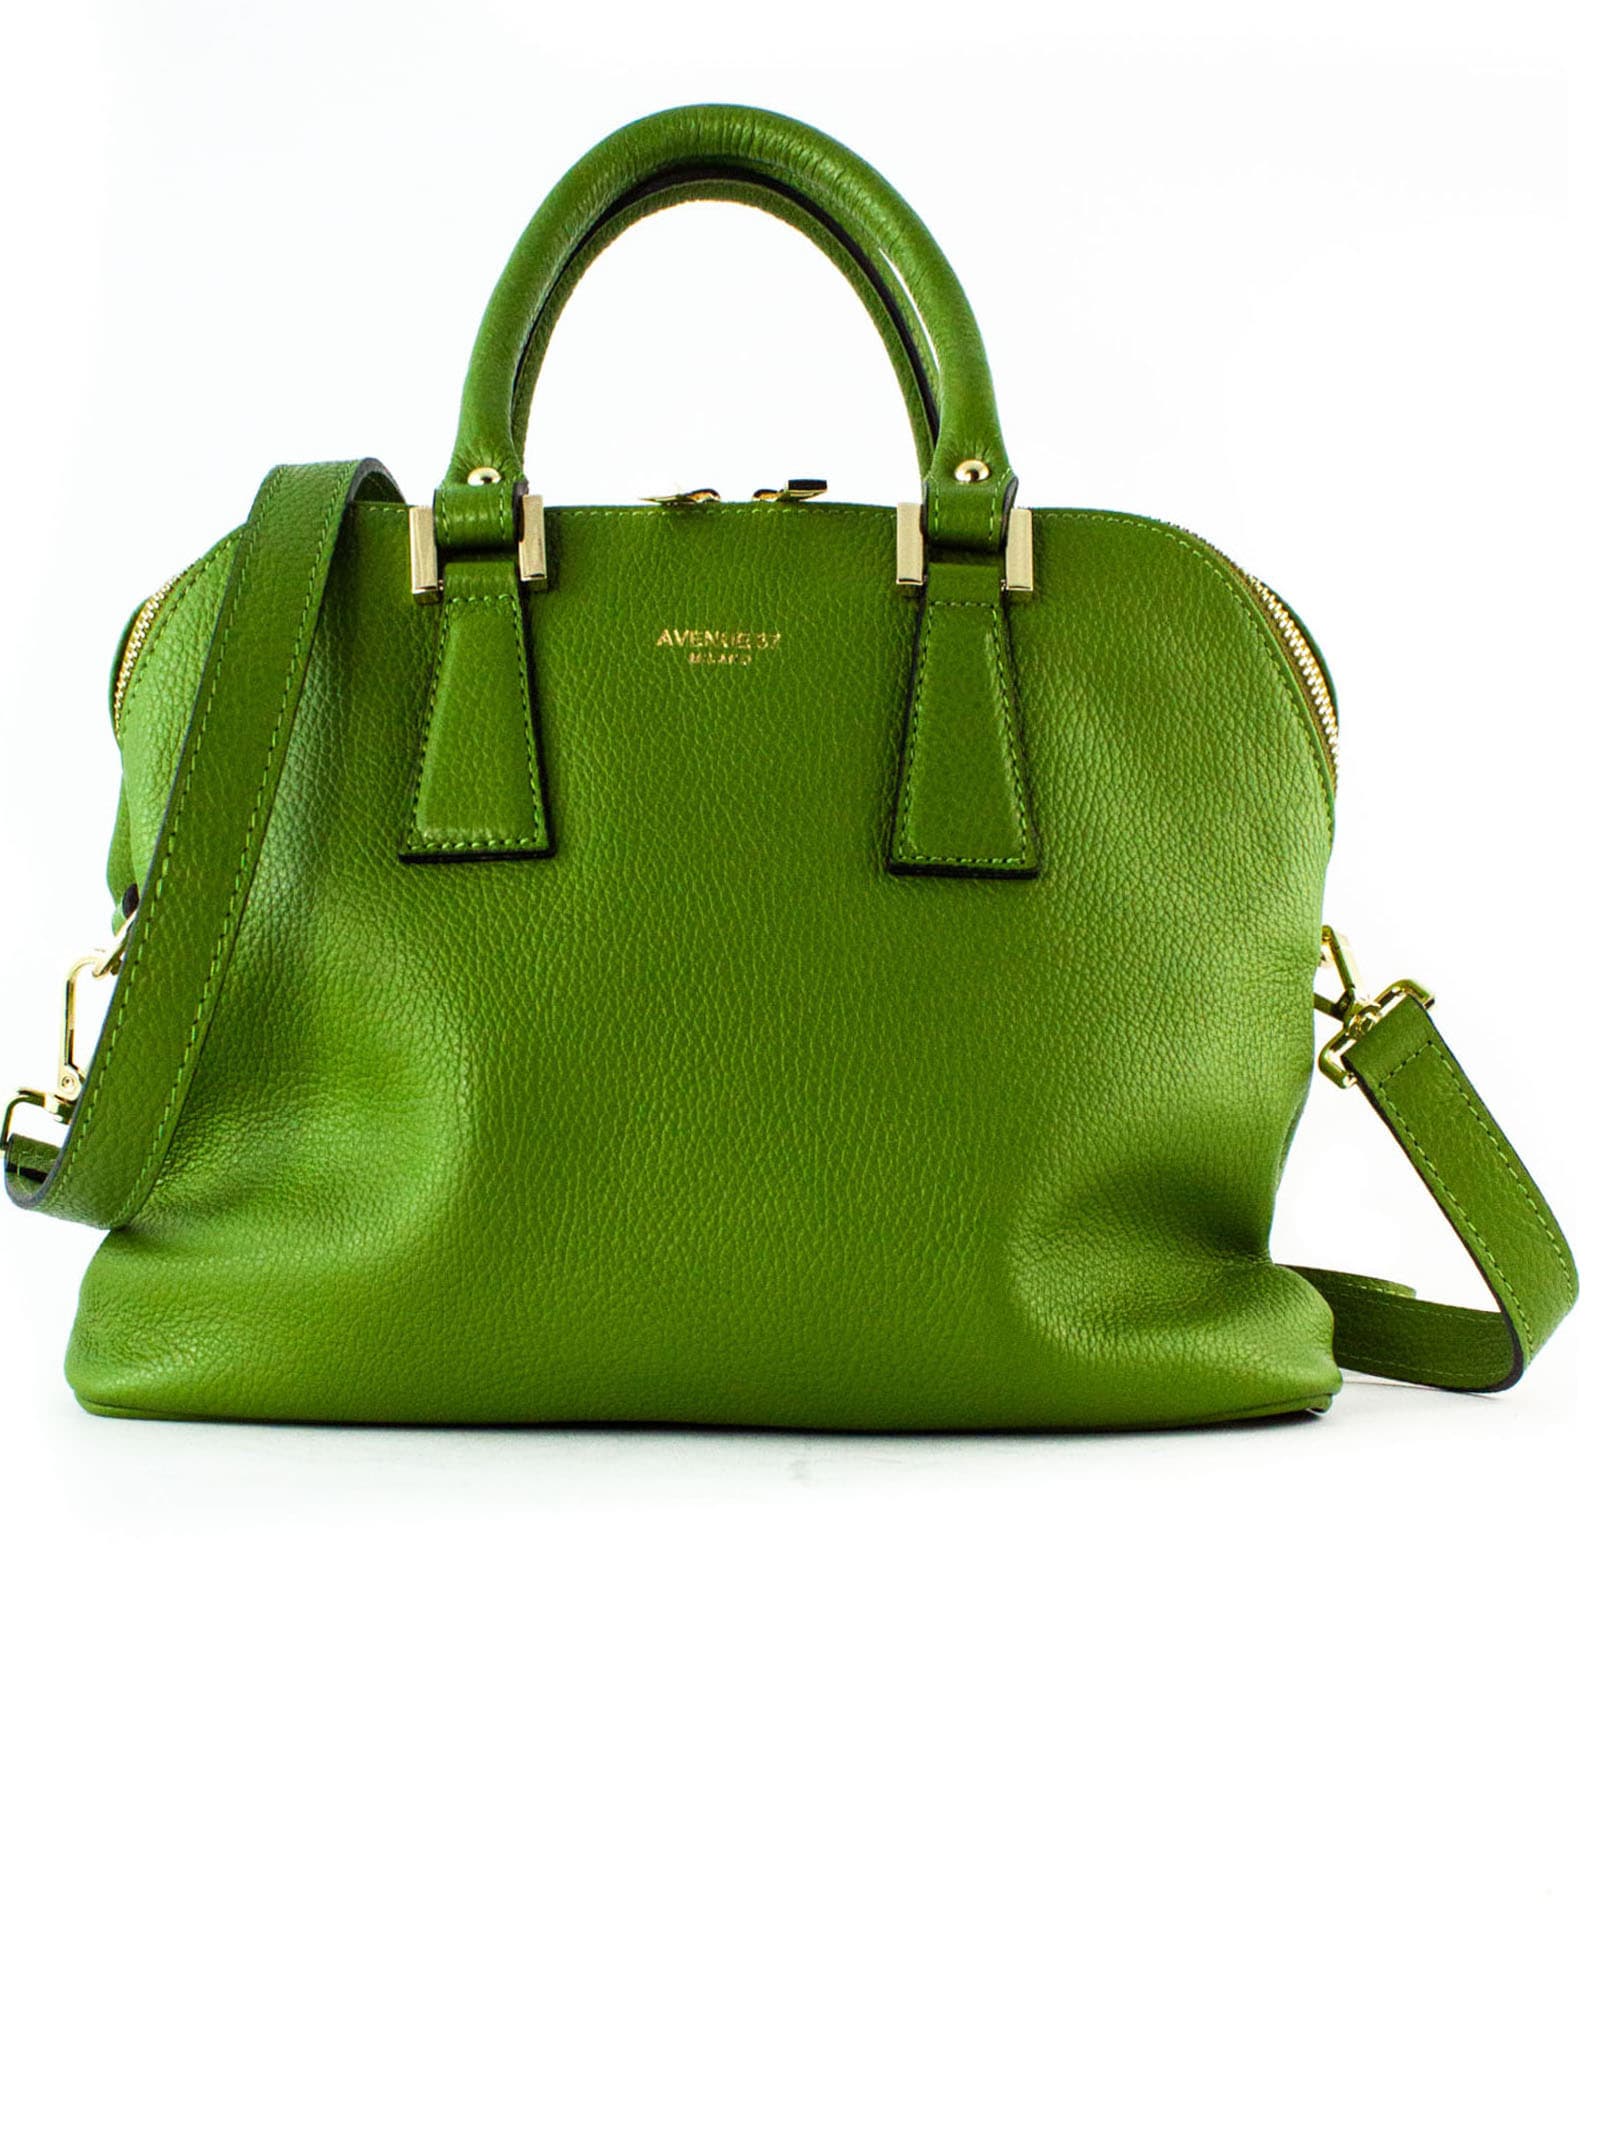 AVENUE 67 GREEN GRAINED SOFT LEATHER BAG